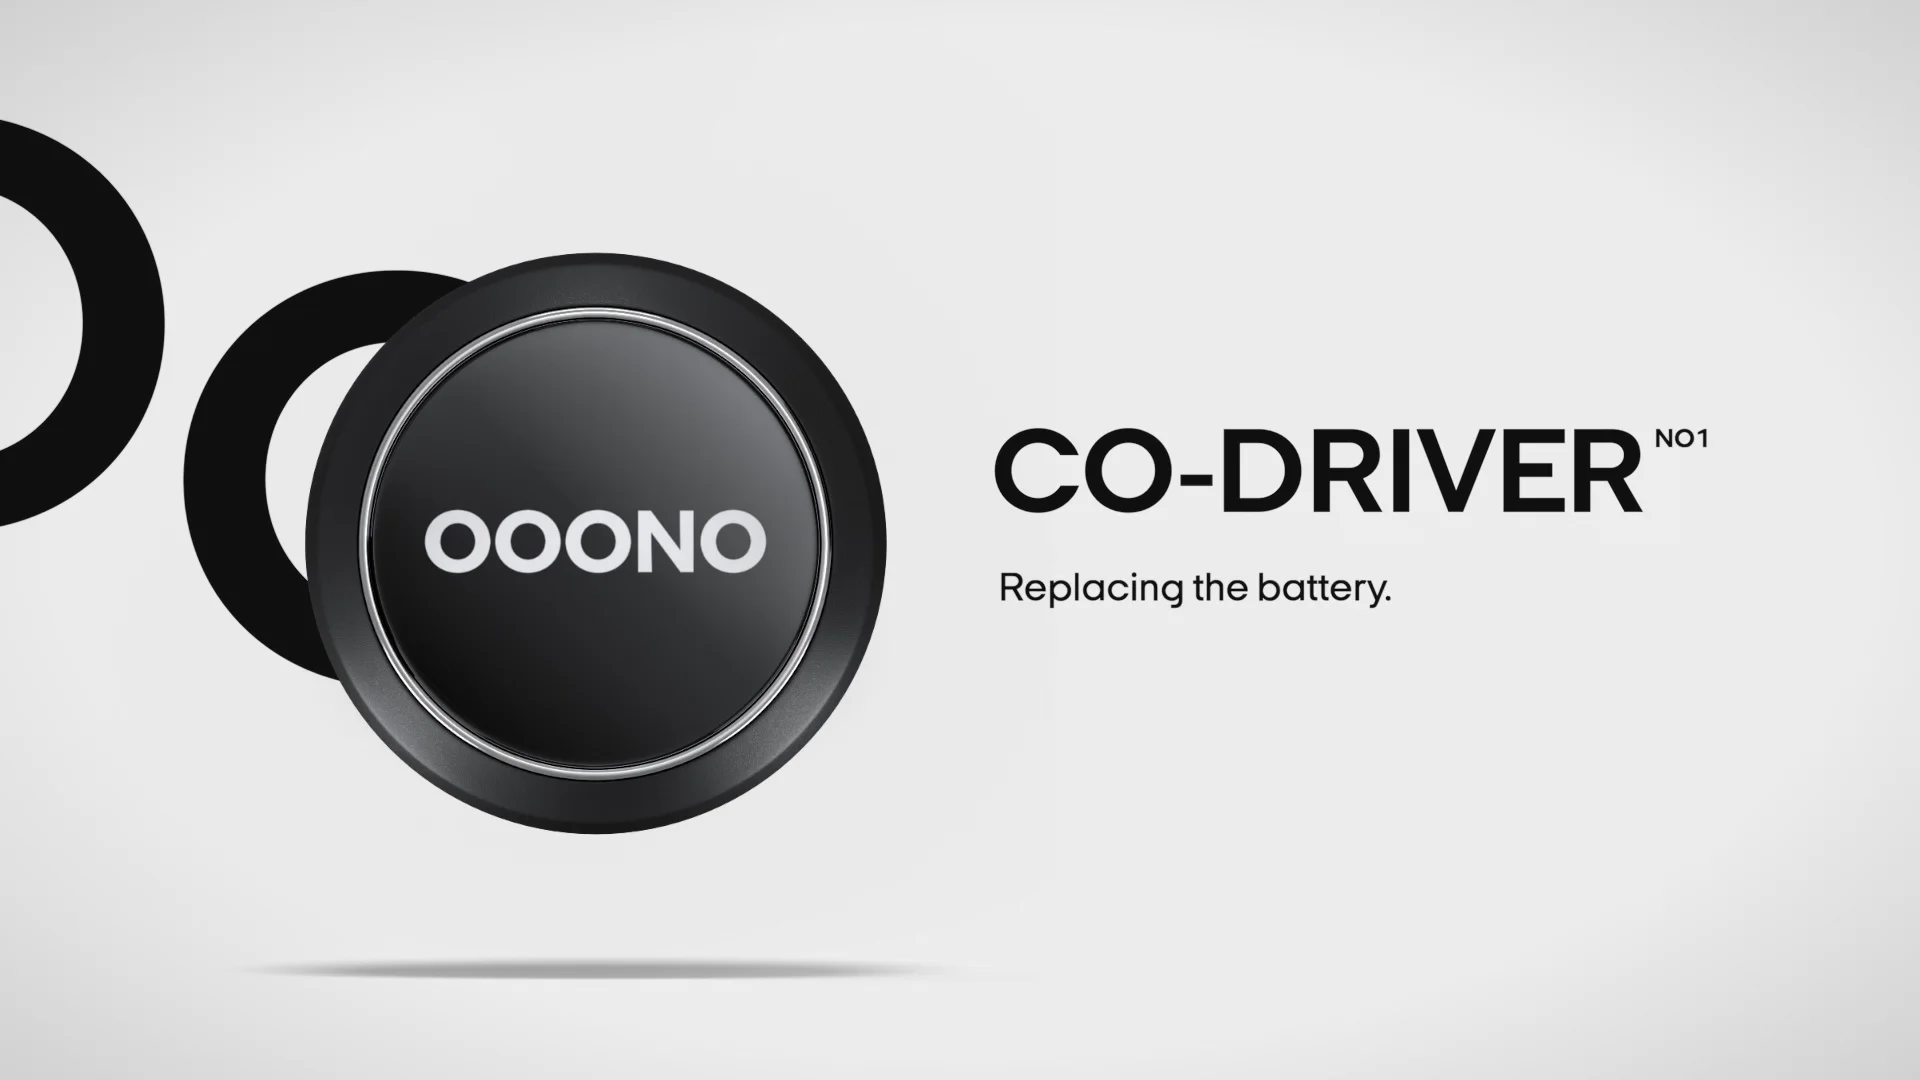 Replacing battery OOONO CO-DRIVER NO1 on Vimeo